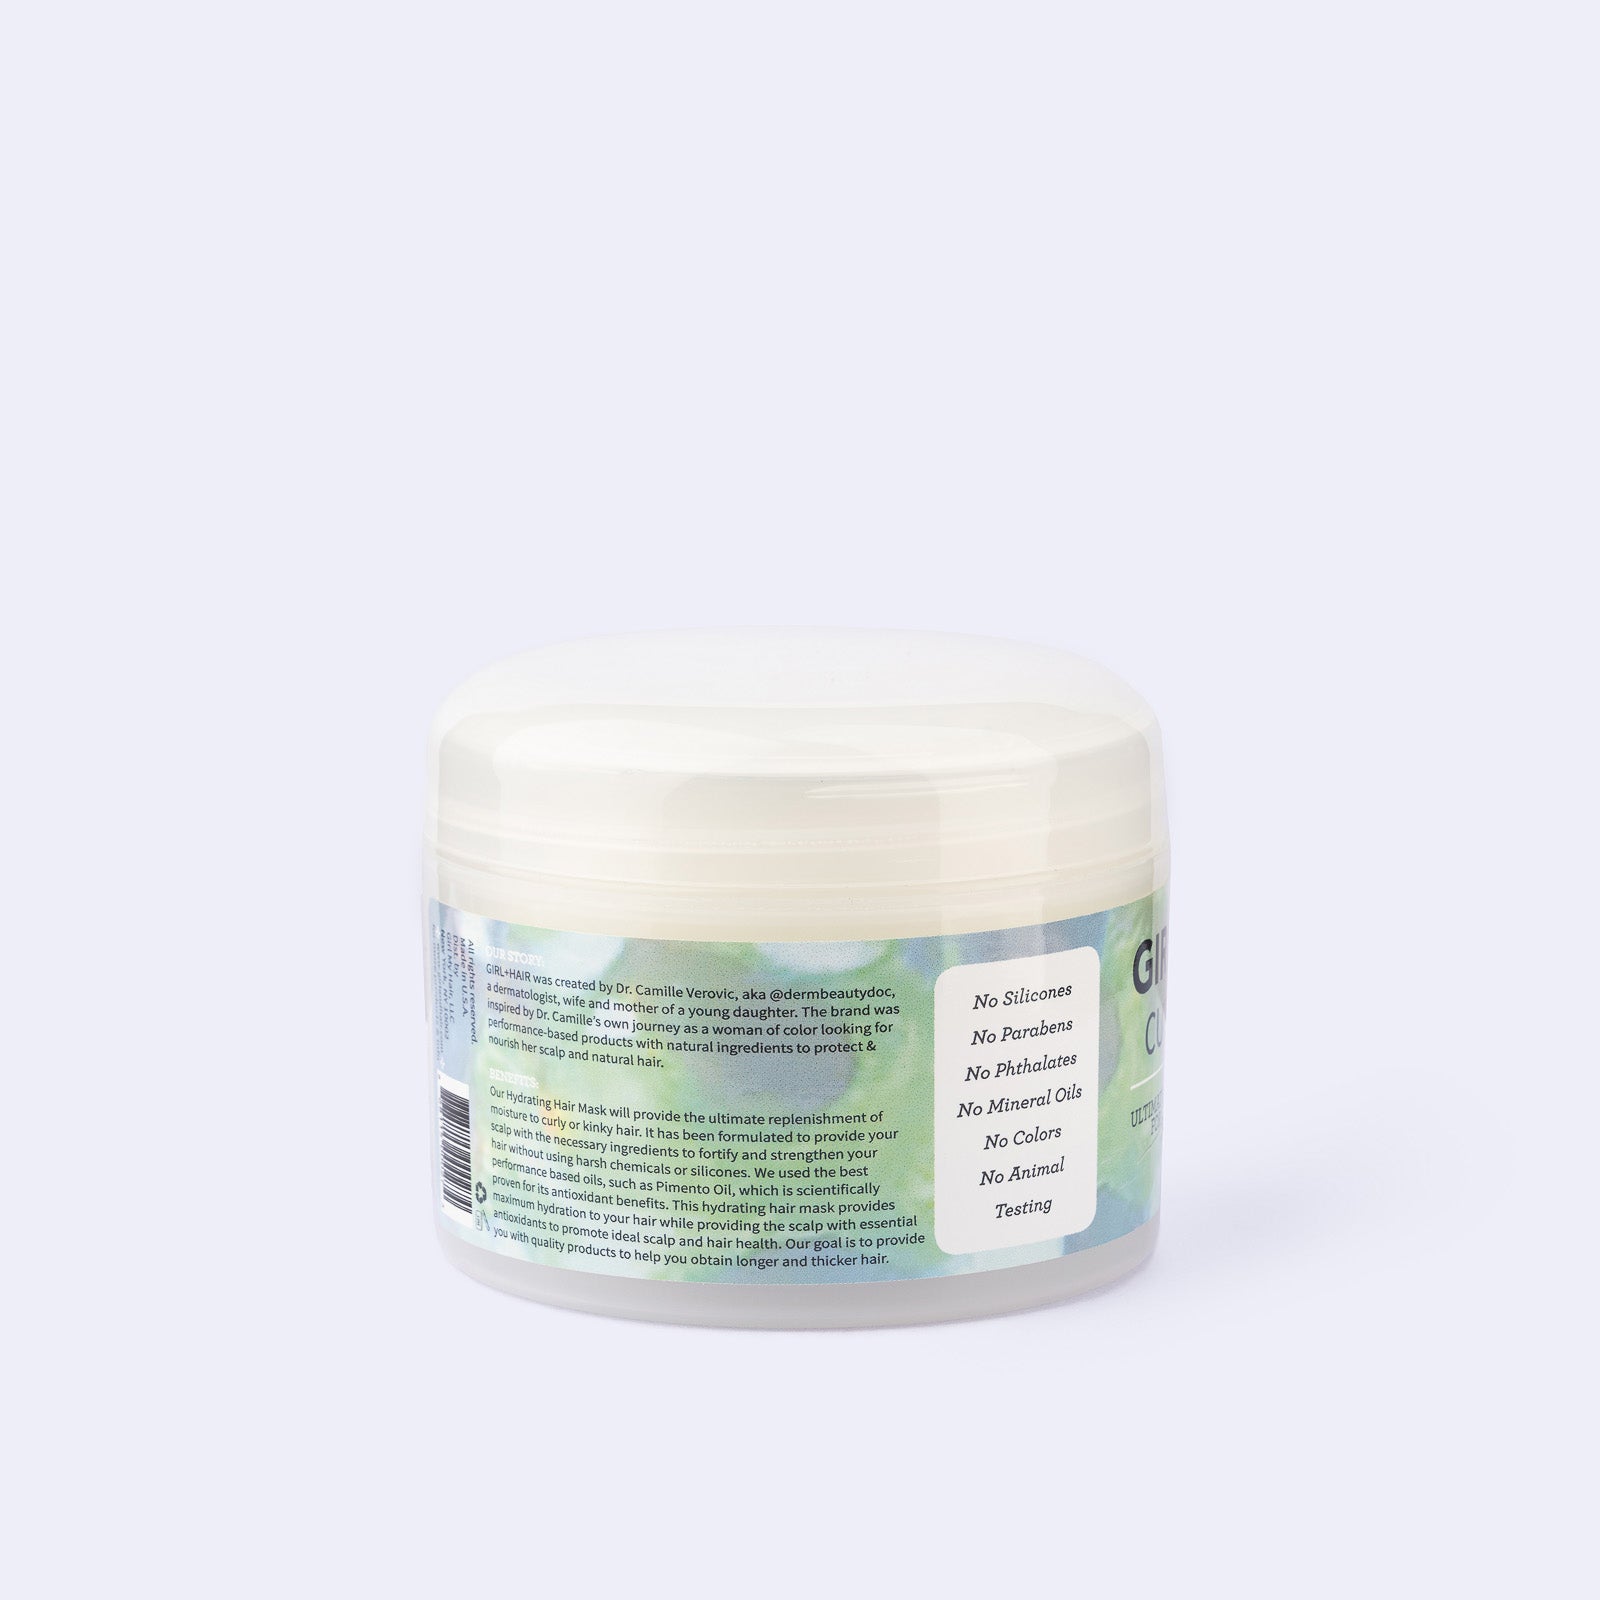 CURL CLOUD Super Hydrating Pimento and Castor Oil Hair Mask